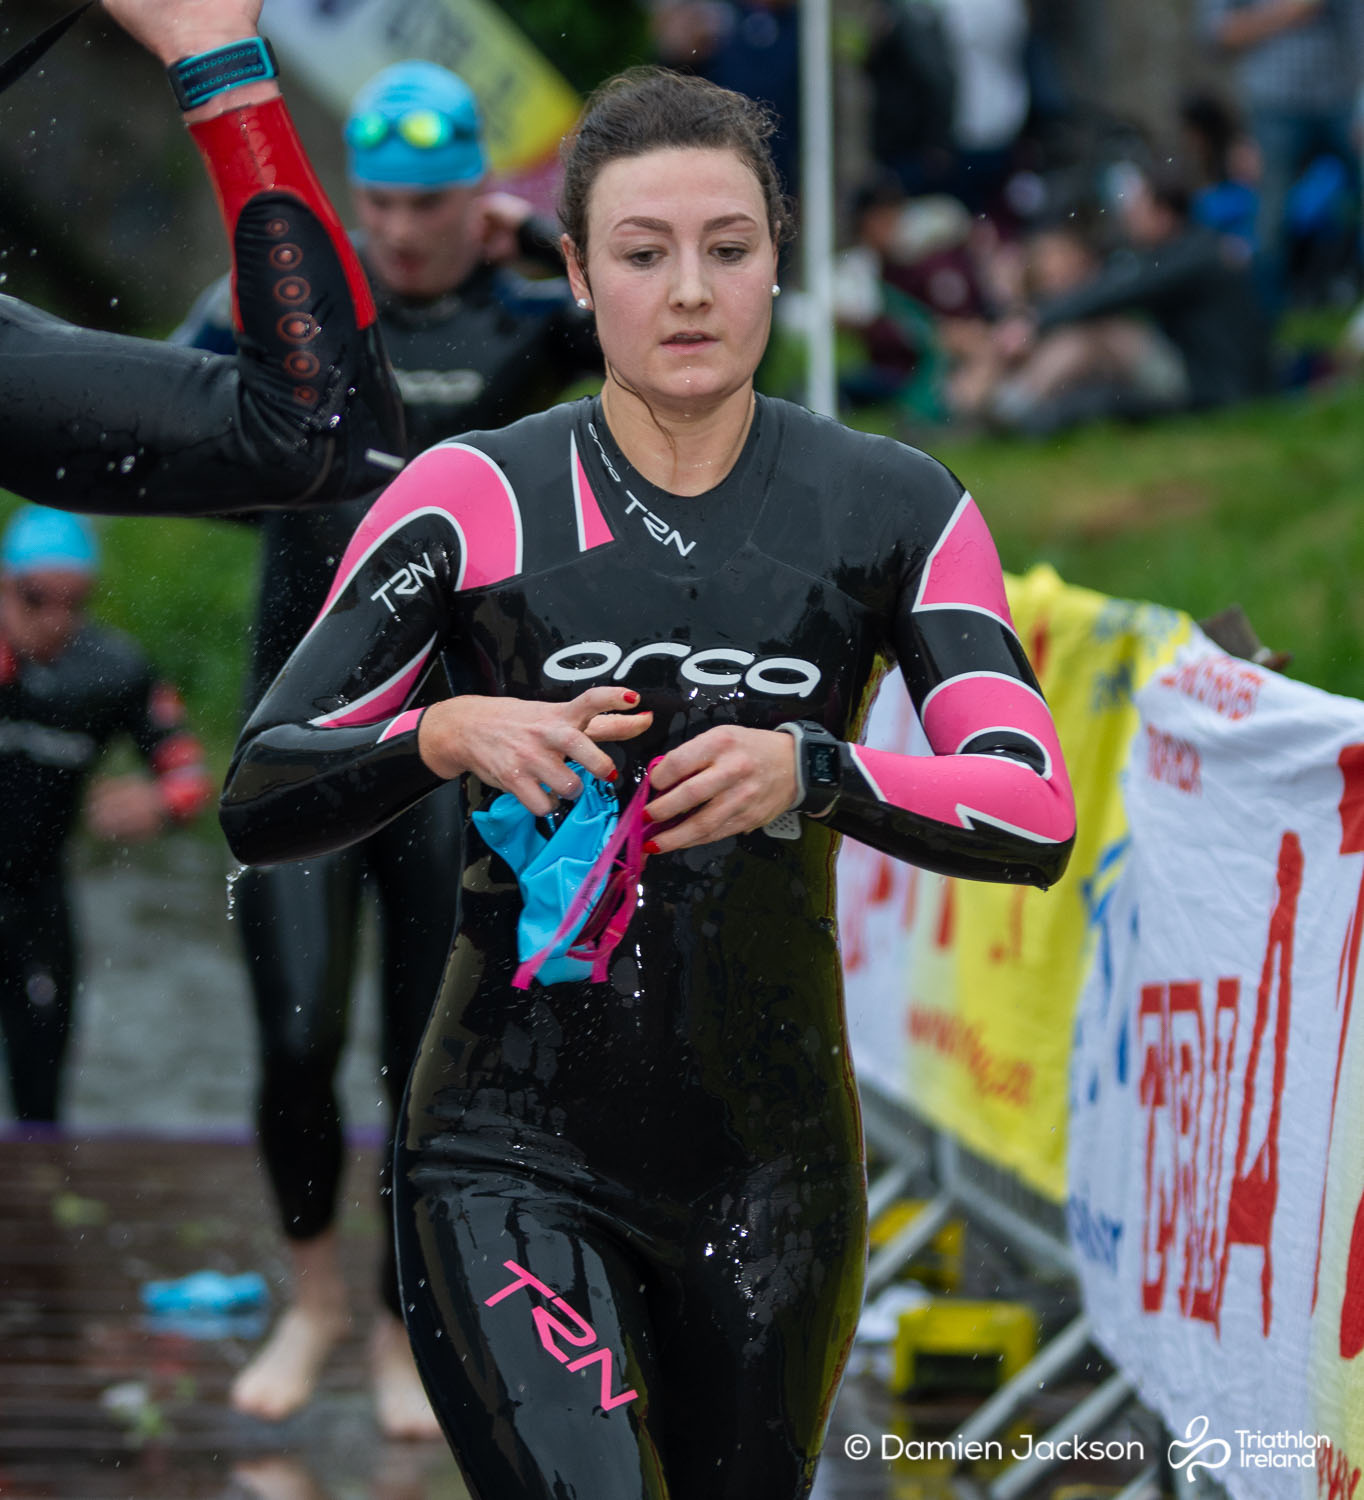 Athy_2018 (73 of 526) - TriAthy - XII Edition - 2nd June 2018